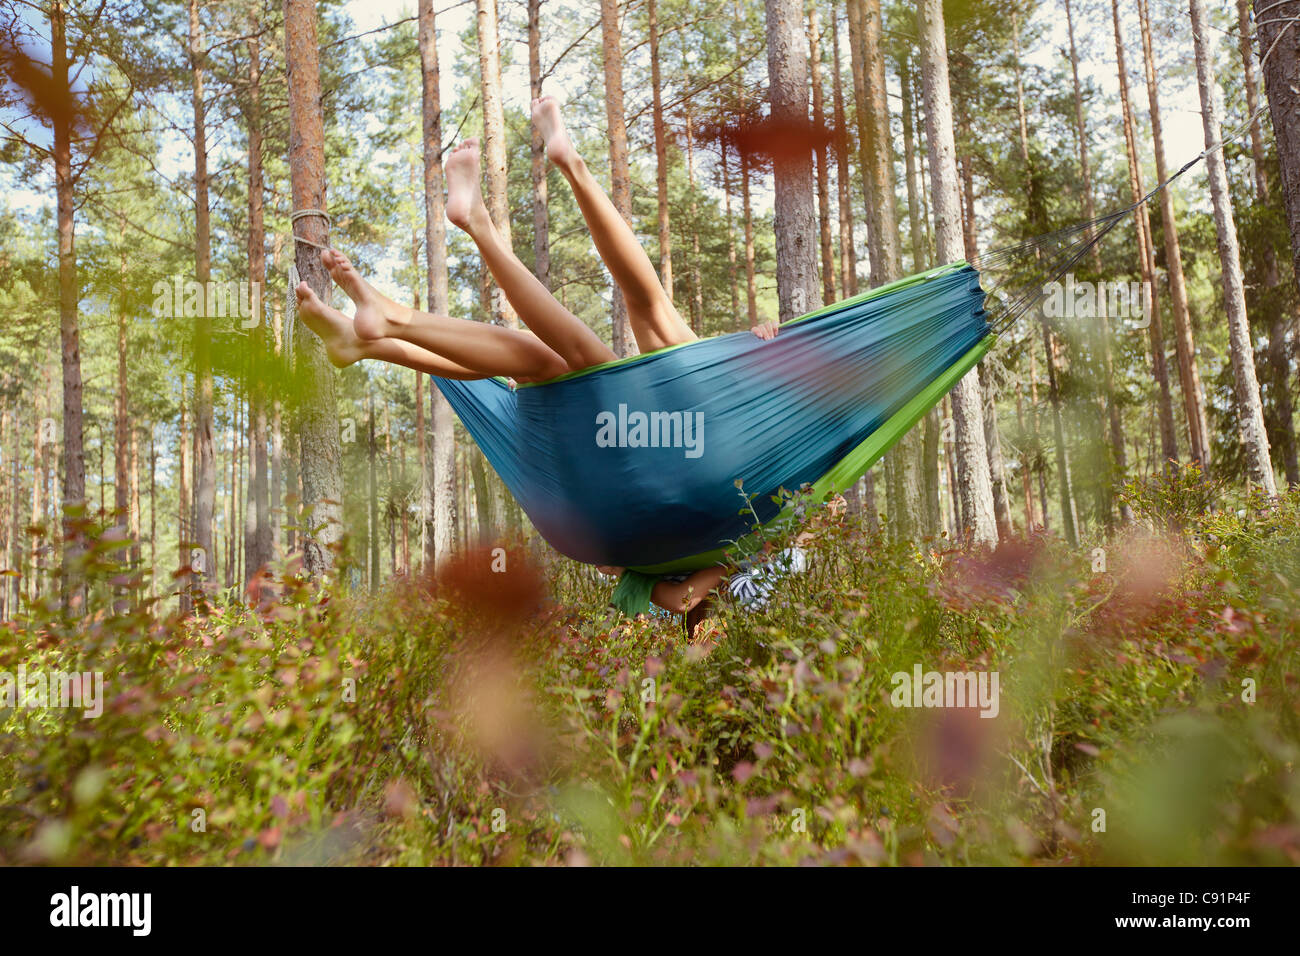 Women relaxing in hammock in forest Banque D'Images